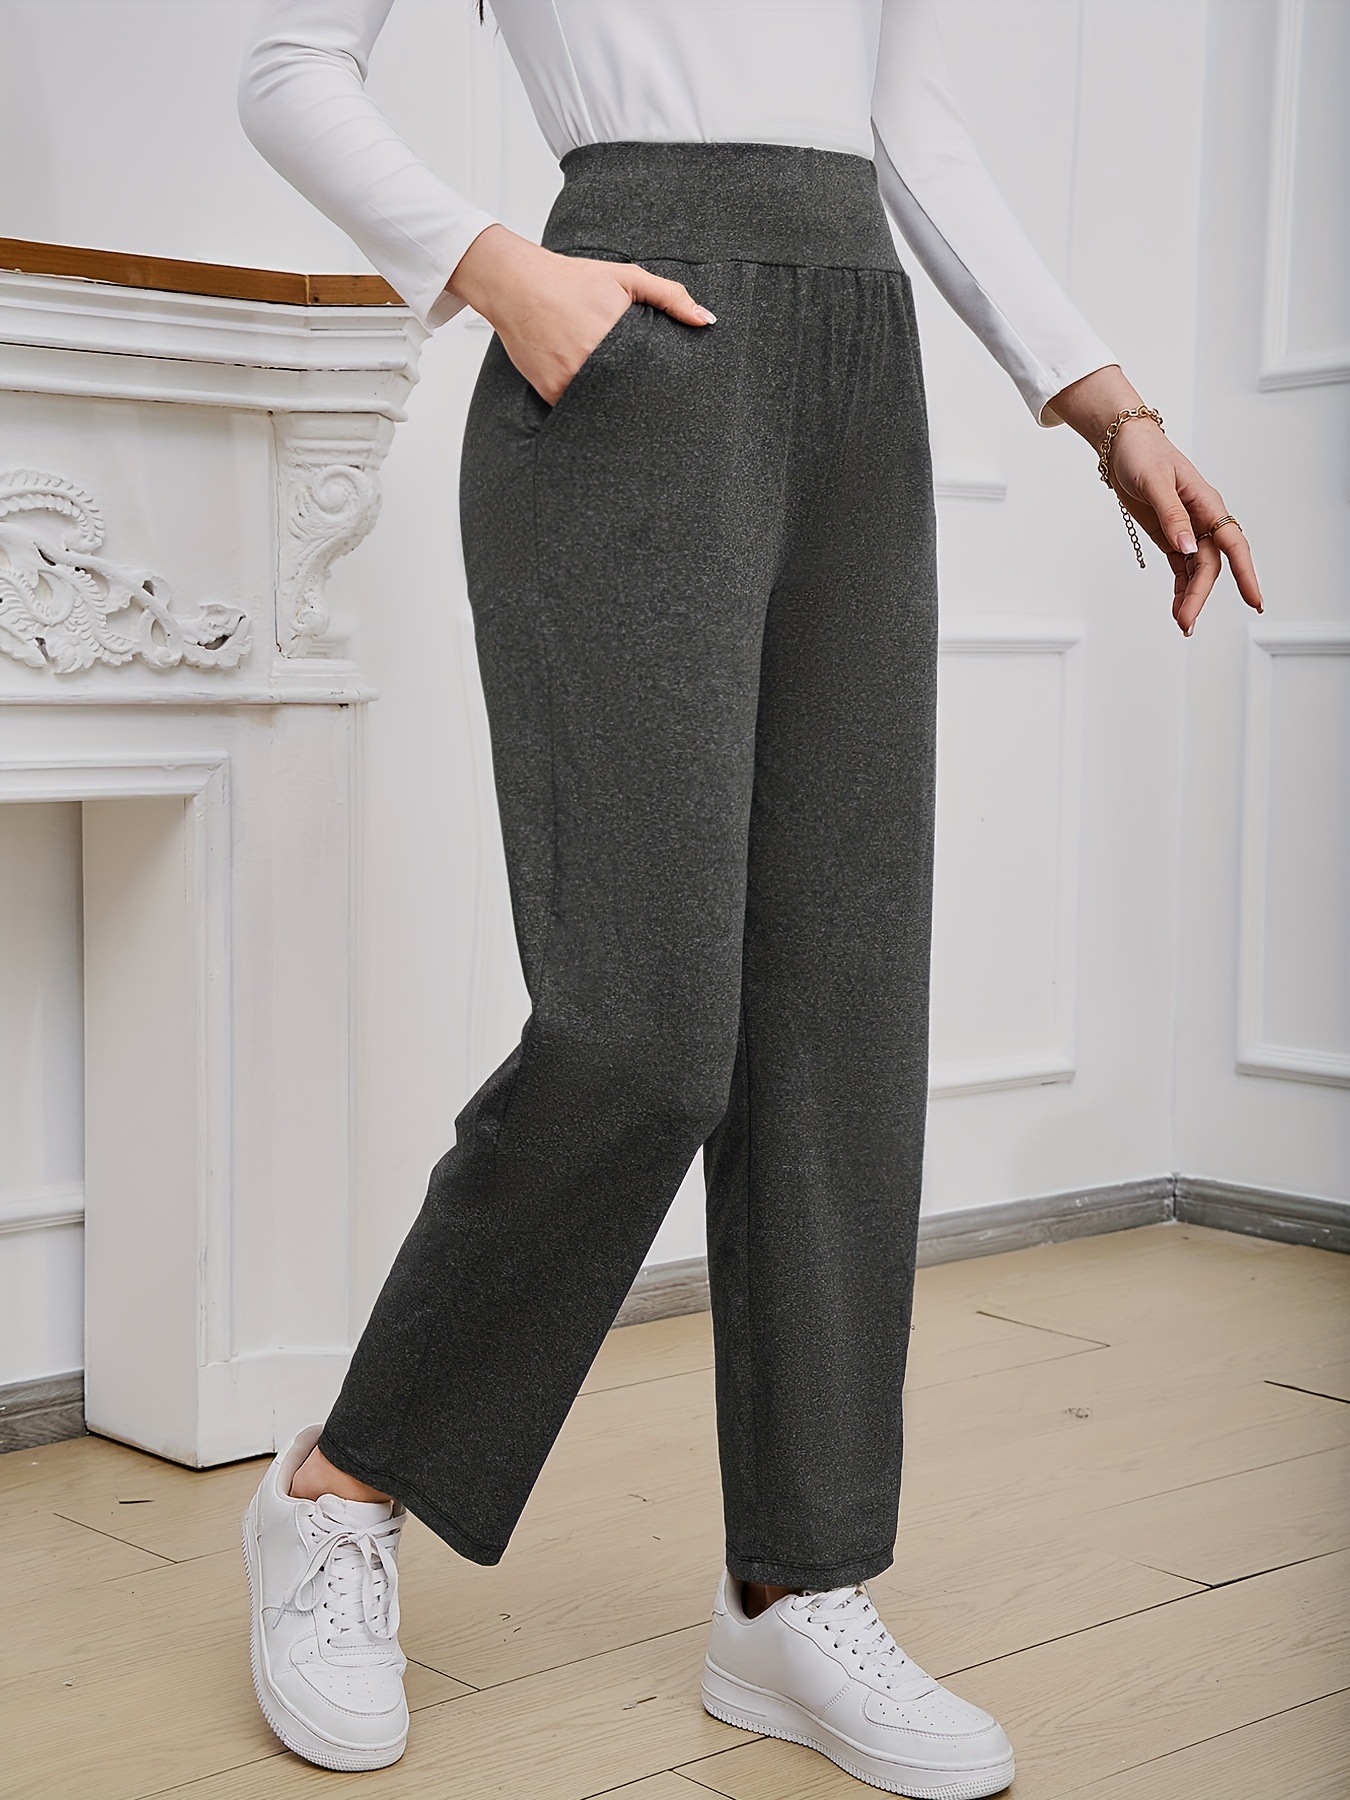 Women's Pants Casual Solid Color Comfy High Rise Pants for Women